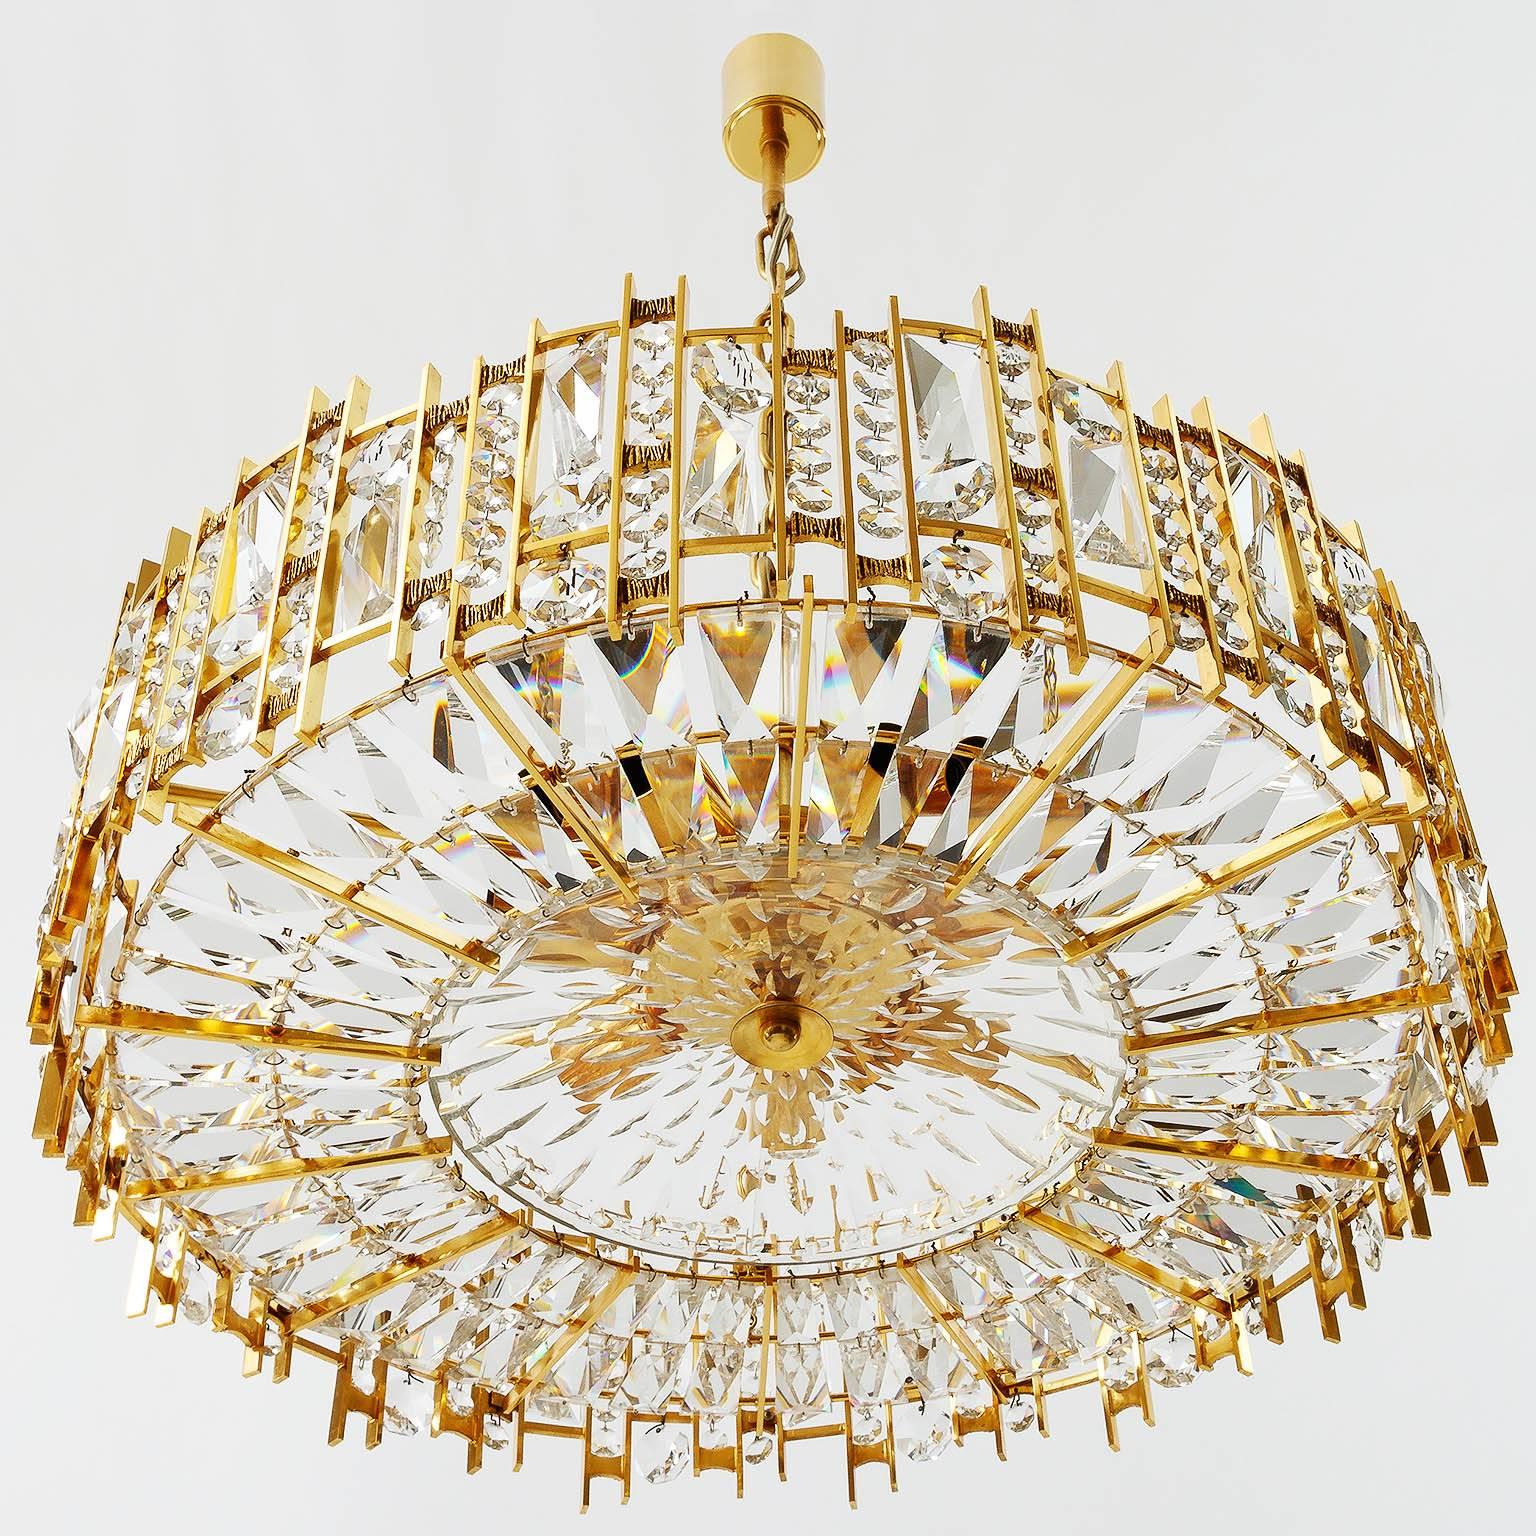 A fantastic and high quality gilded chandelier / pendant light fixture by Palwa (Palme & Walter), Germany, manufactured in Mid-Century, circa 1970 (late 1960s or early 1970s).
This hollywood regency lamp is made of a gold-plated brass frame